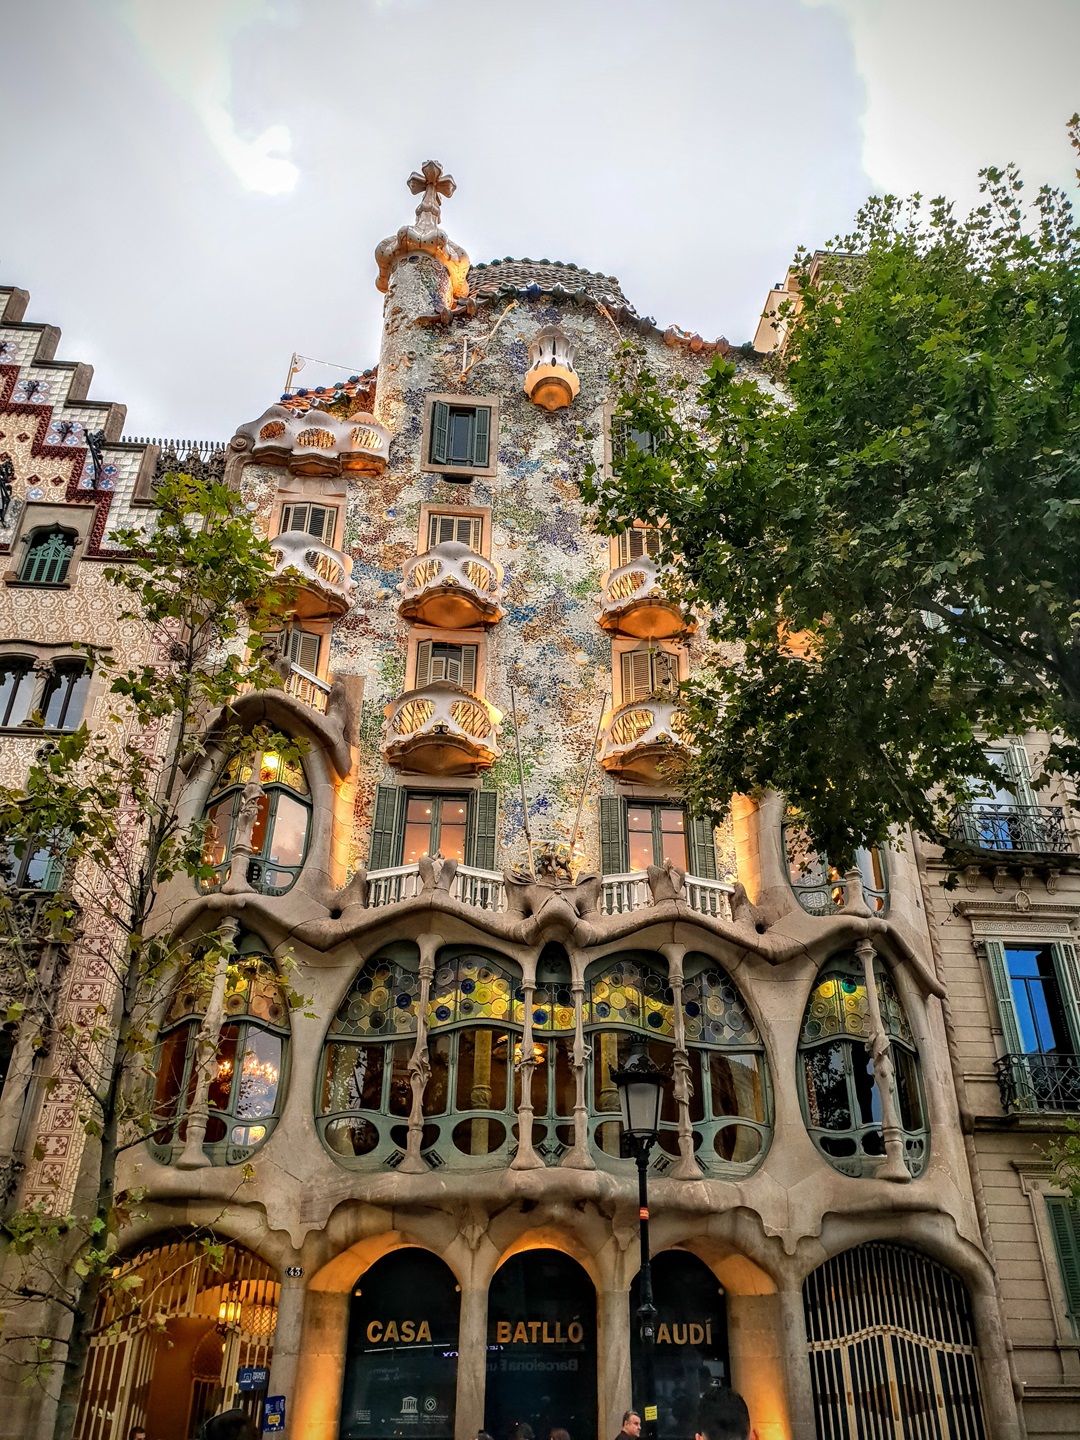 Casa Batlló, Barcelona. The Building Was Built In 1877. It Was A Classic Building Without Remarkable Characteristics. It Was Redesigned In 1904 By Gaudí And Has Been Refurbished Several Times After That. Casa Batlló Is Identifiable As Modernism Or Art Nouveau In The Broadest Sense